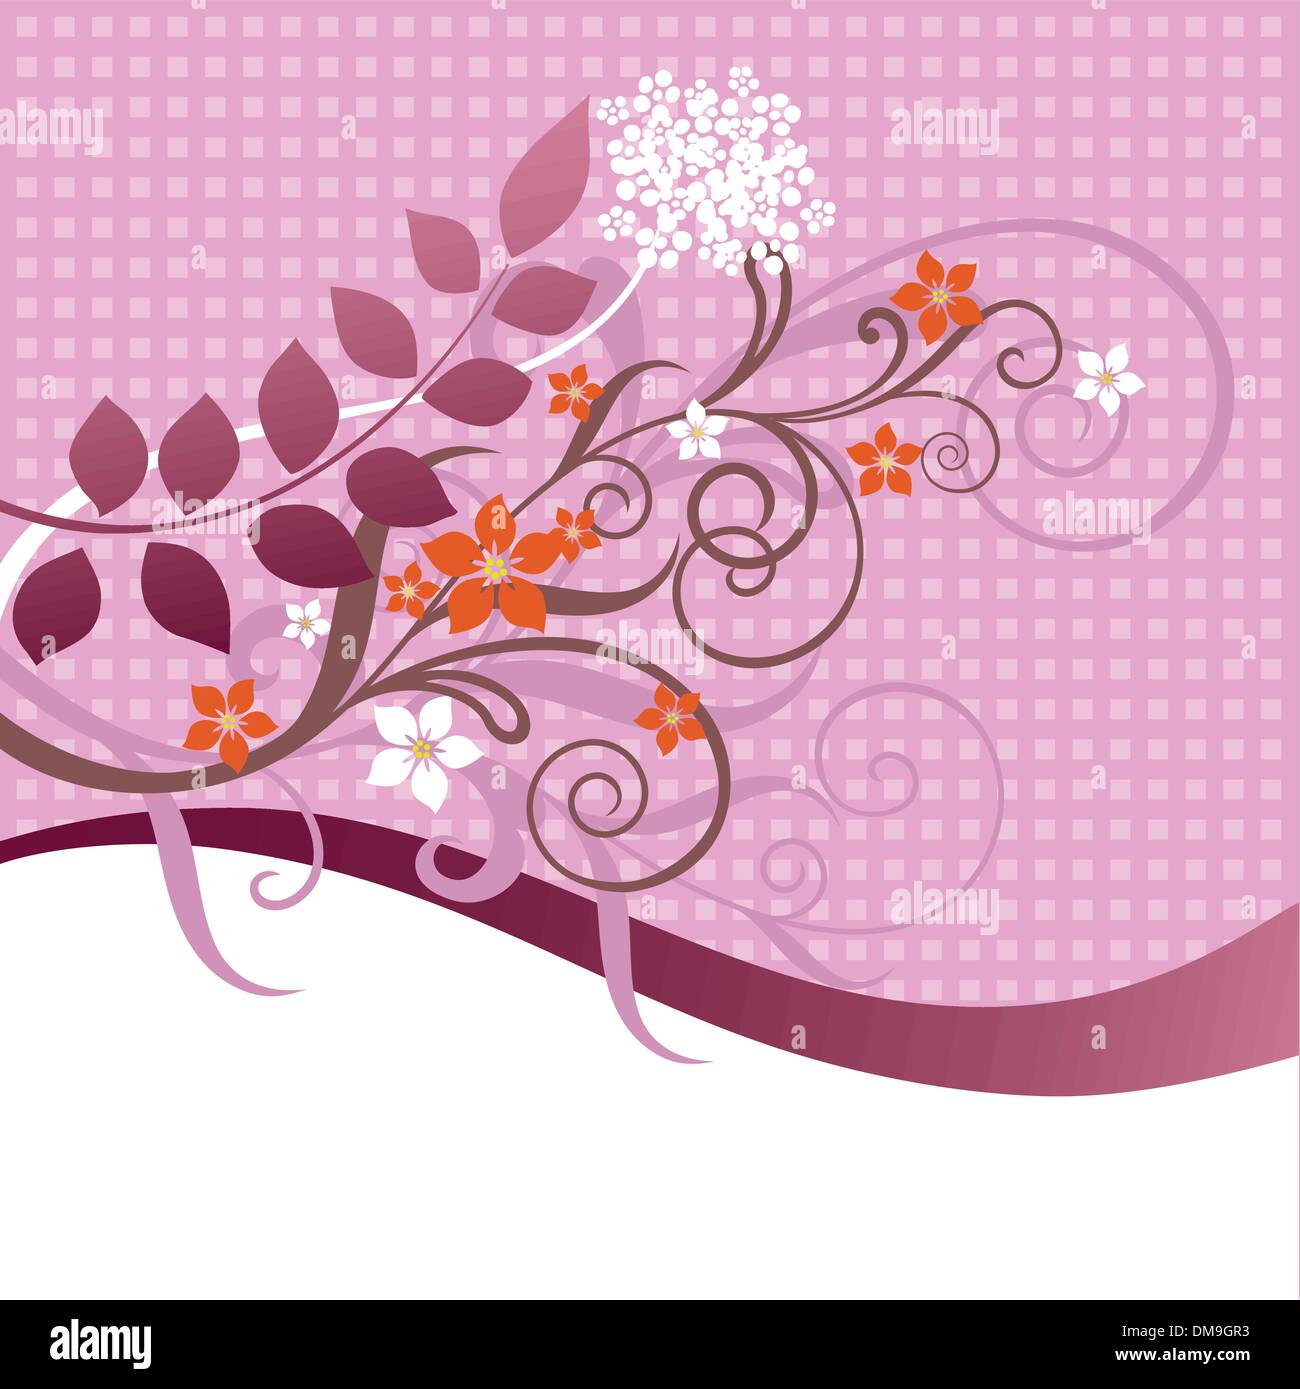 Pink and orange floral ornament Stock Vector